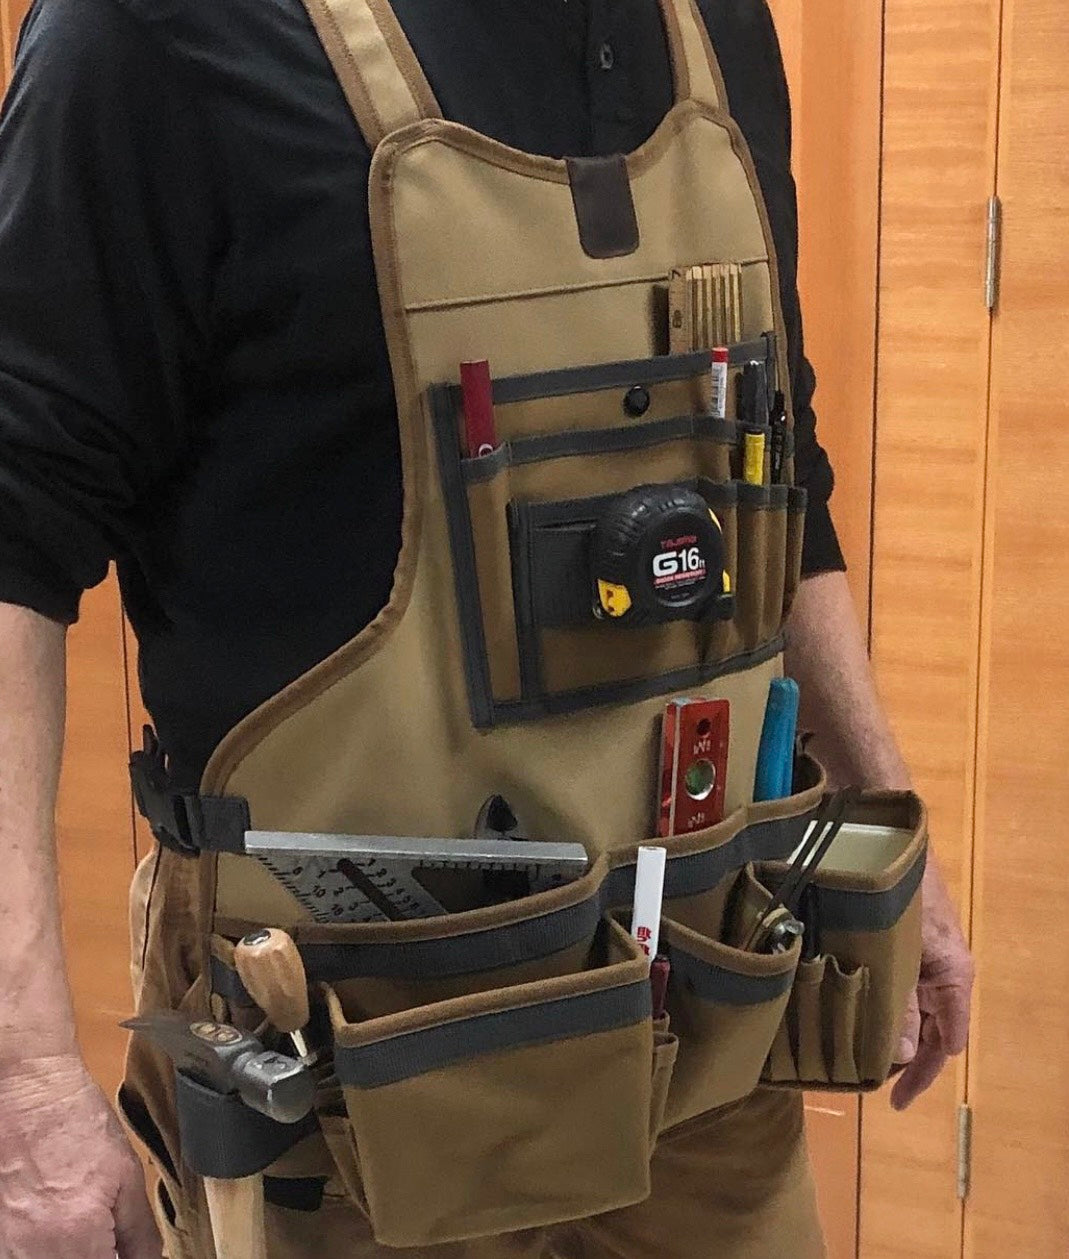 TA-XLBX TOOL APRON WITH BOXED POCKETS（チェストエプロン）